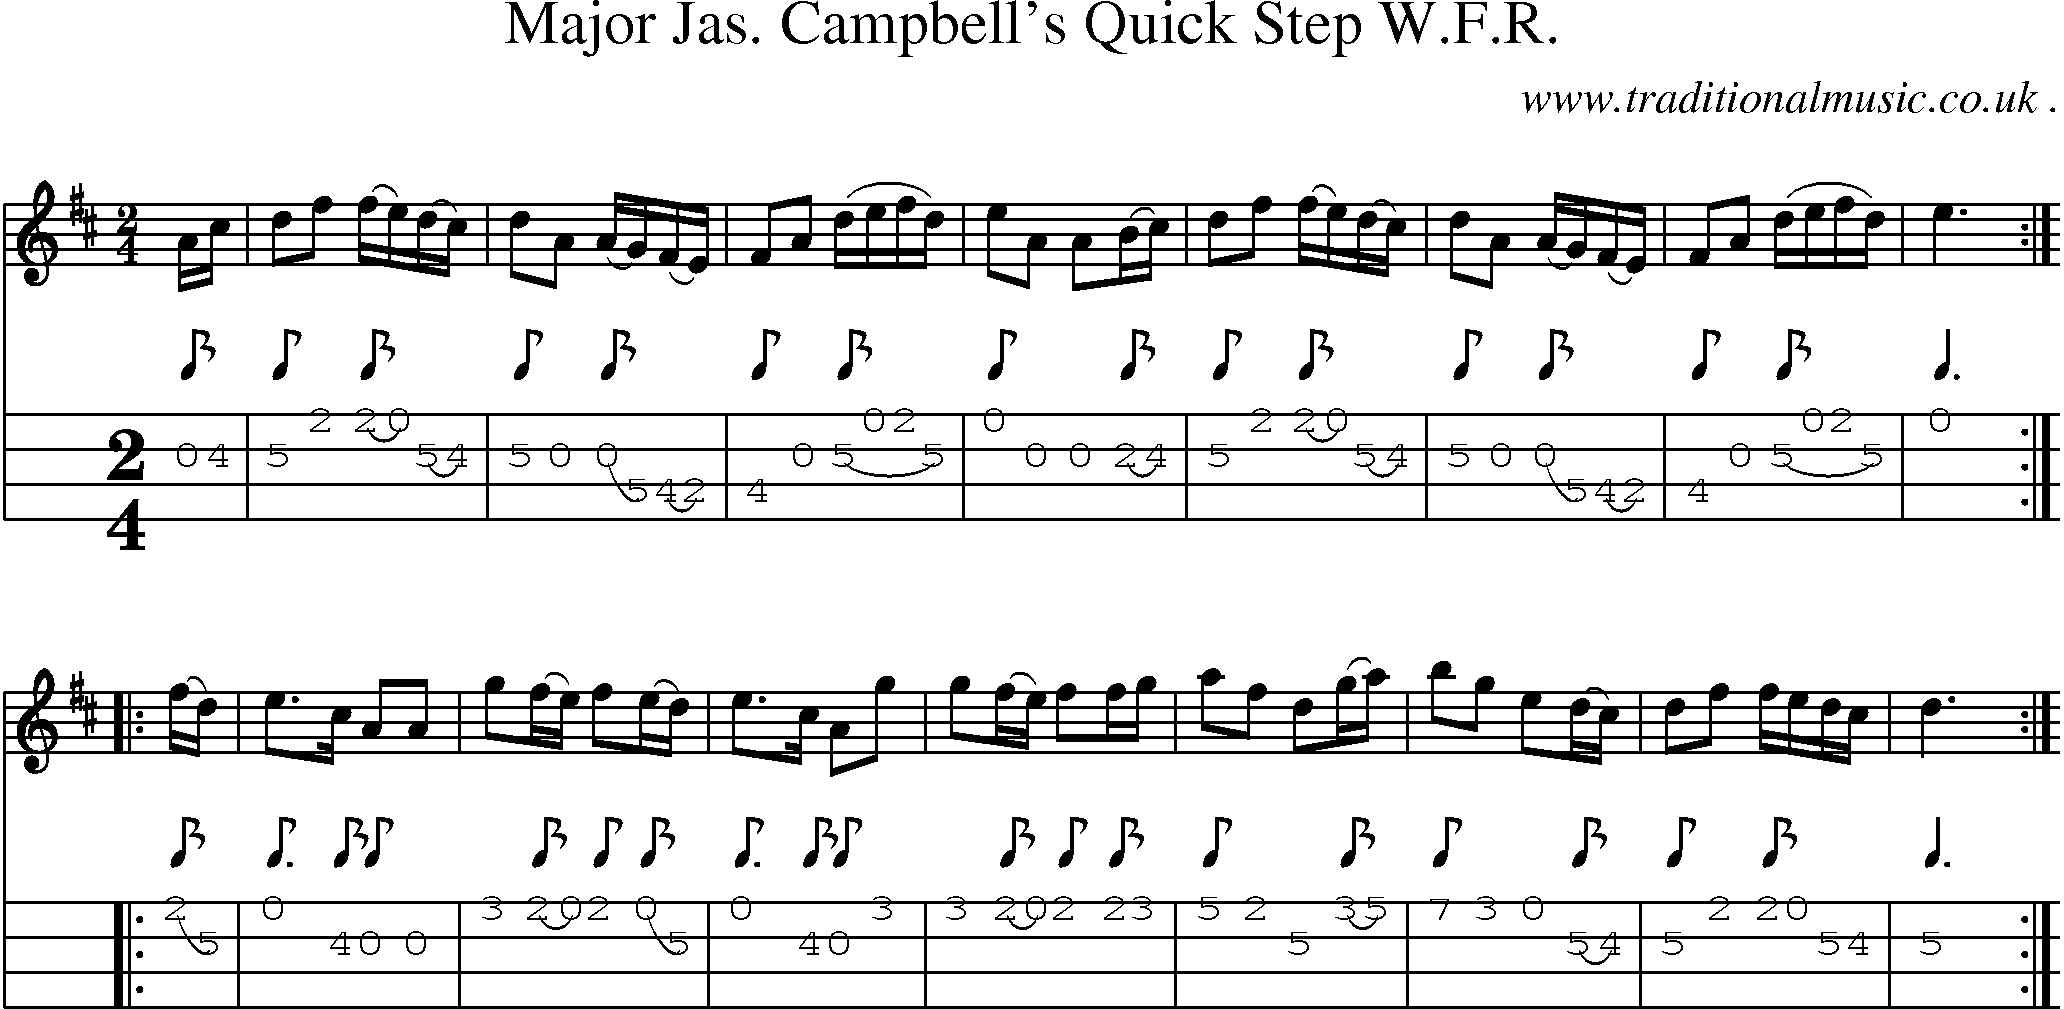 Sheet-Music and Mandolin Tabs for Major Jas Campbells Quick Step Wfr